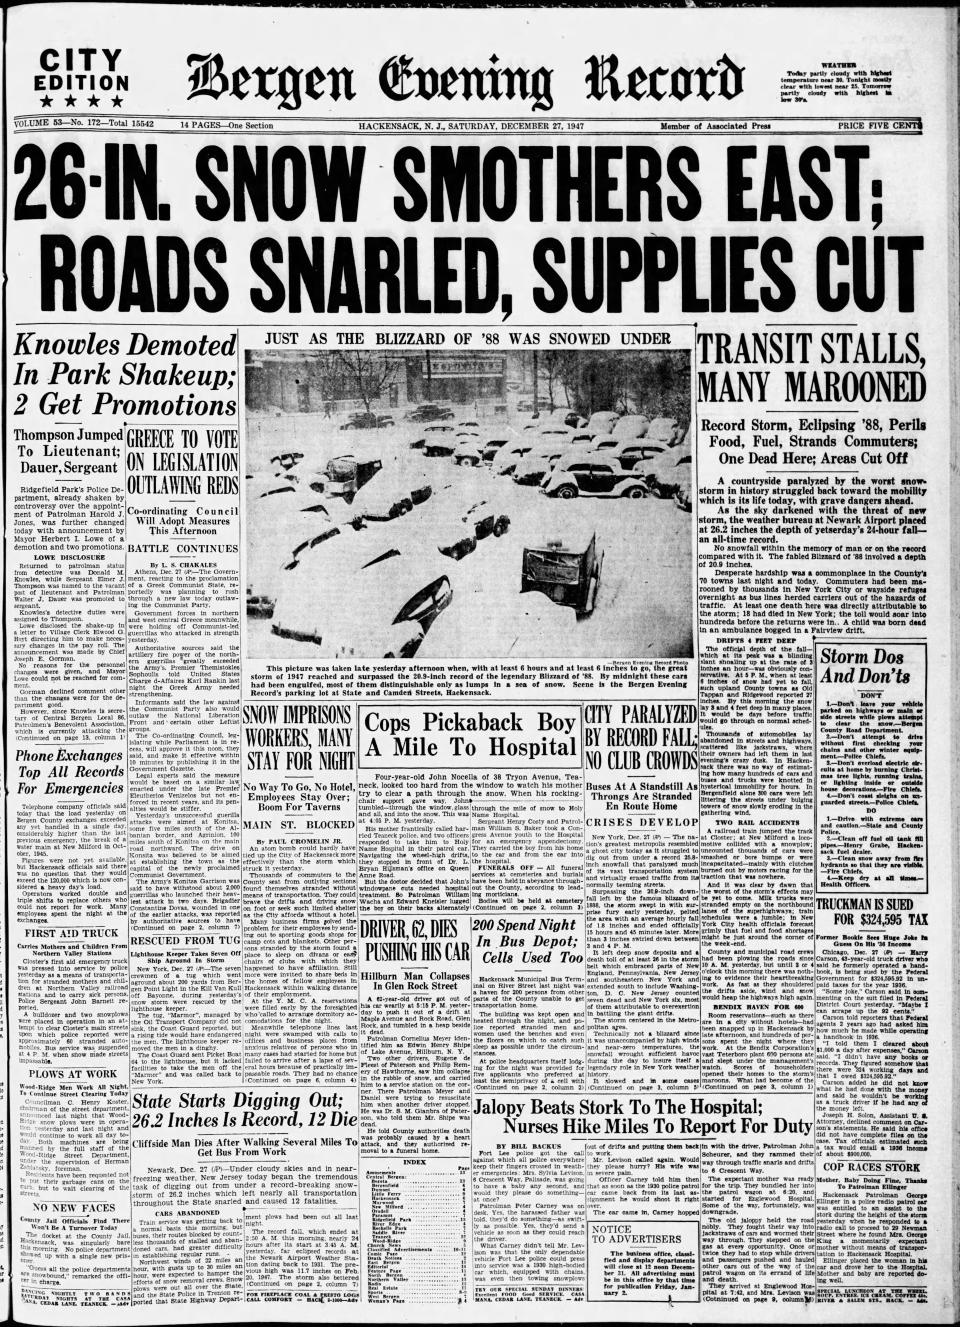 The front page of The Record on Dec. 27, 1947.